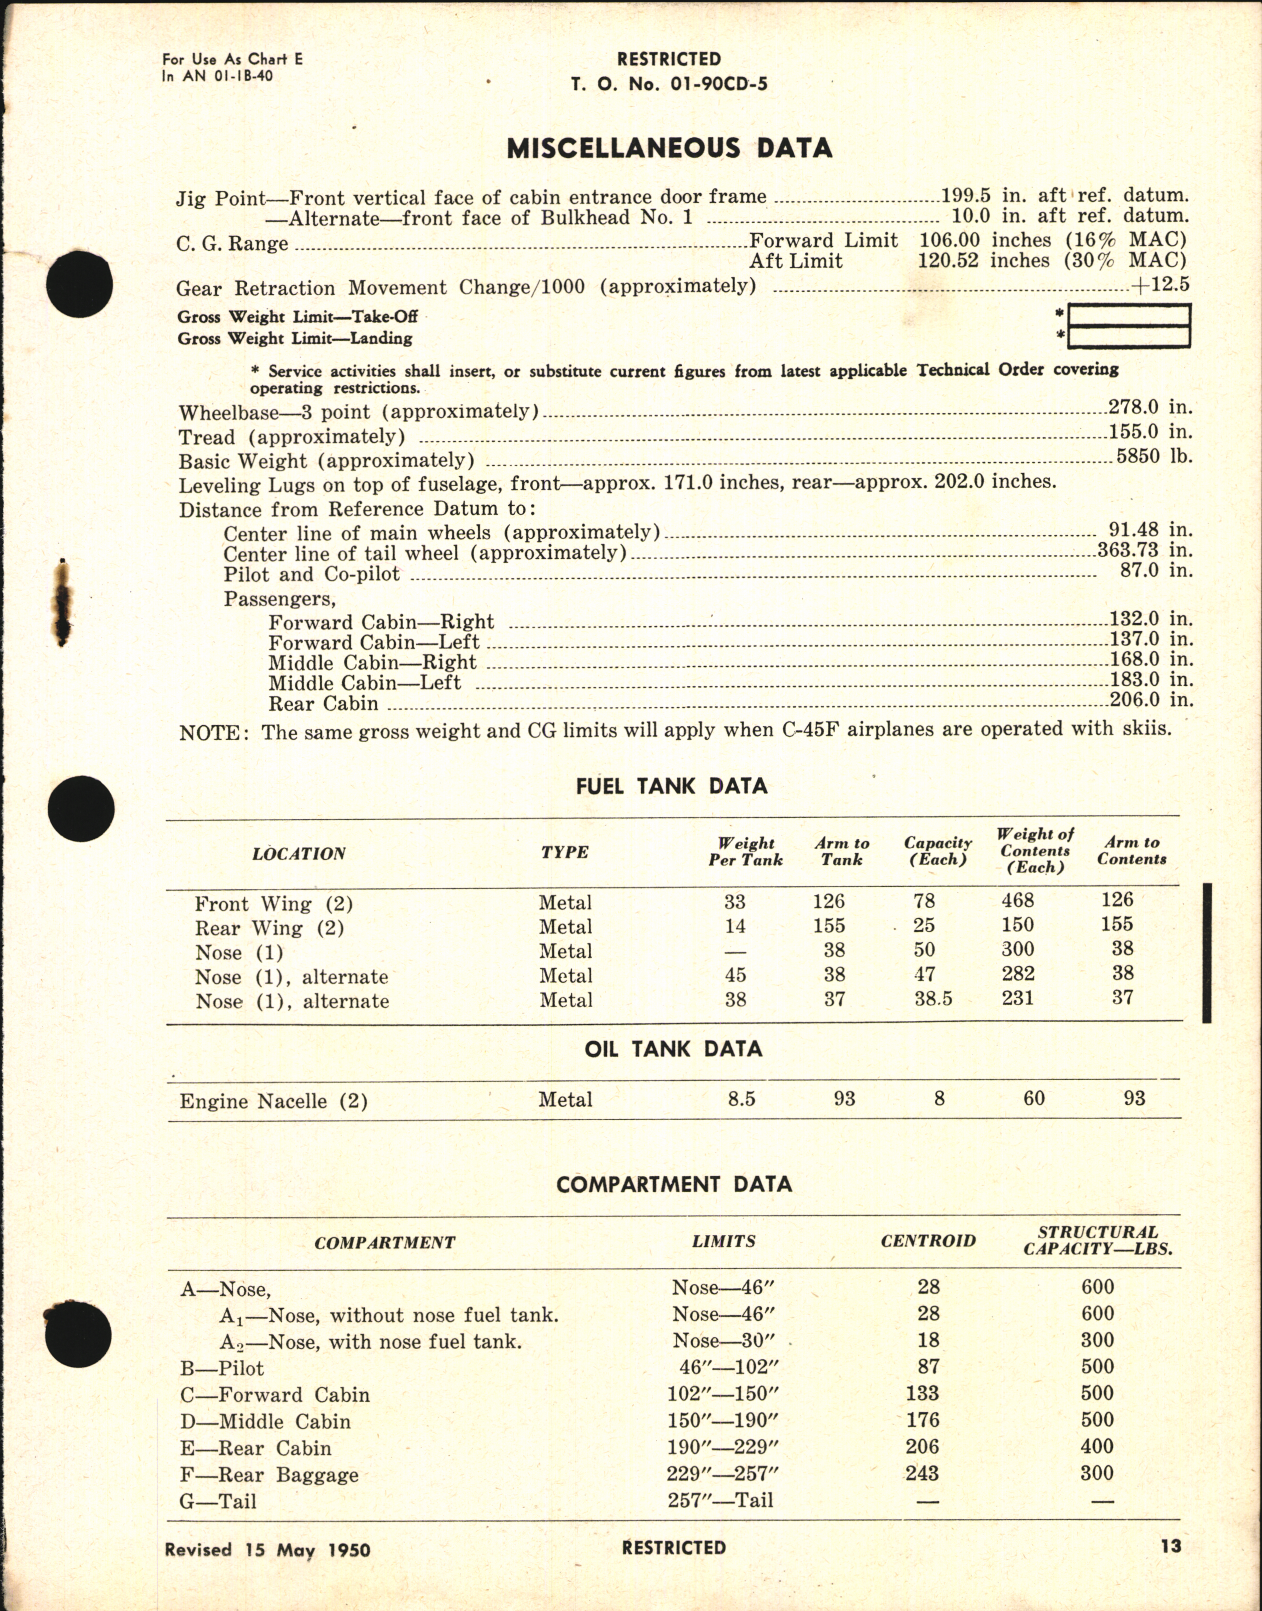 Sample page 5 from AirCorps Library document: Basic Weight Check List and Loading Data for C-45F